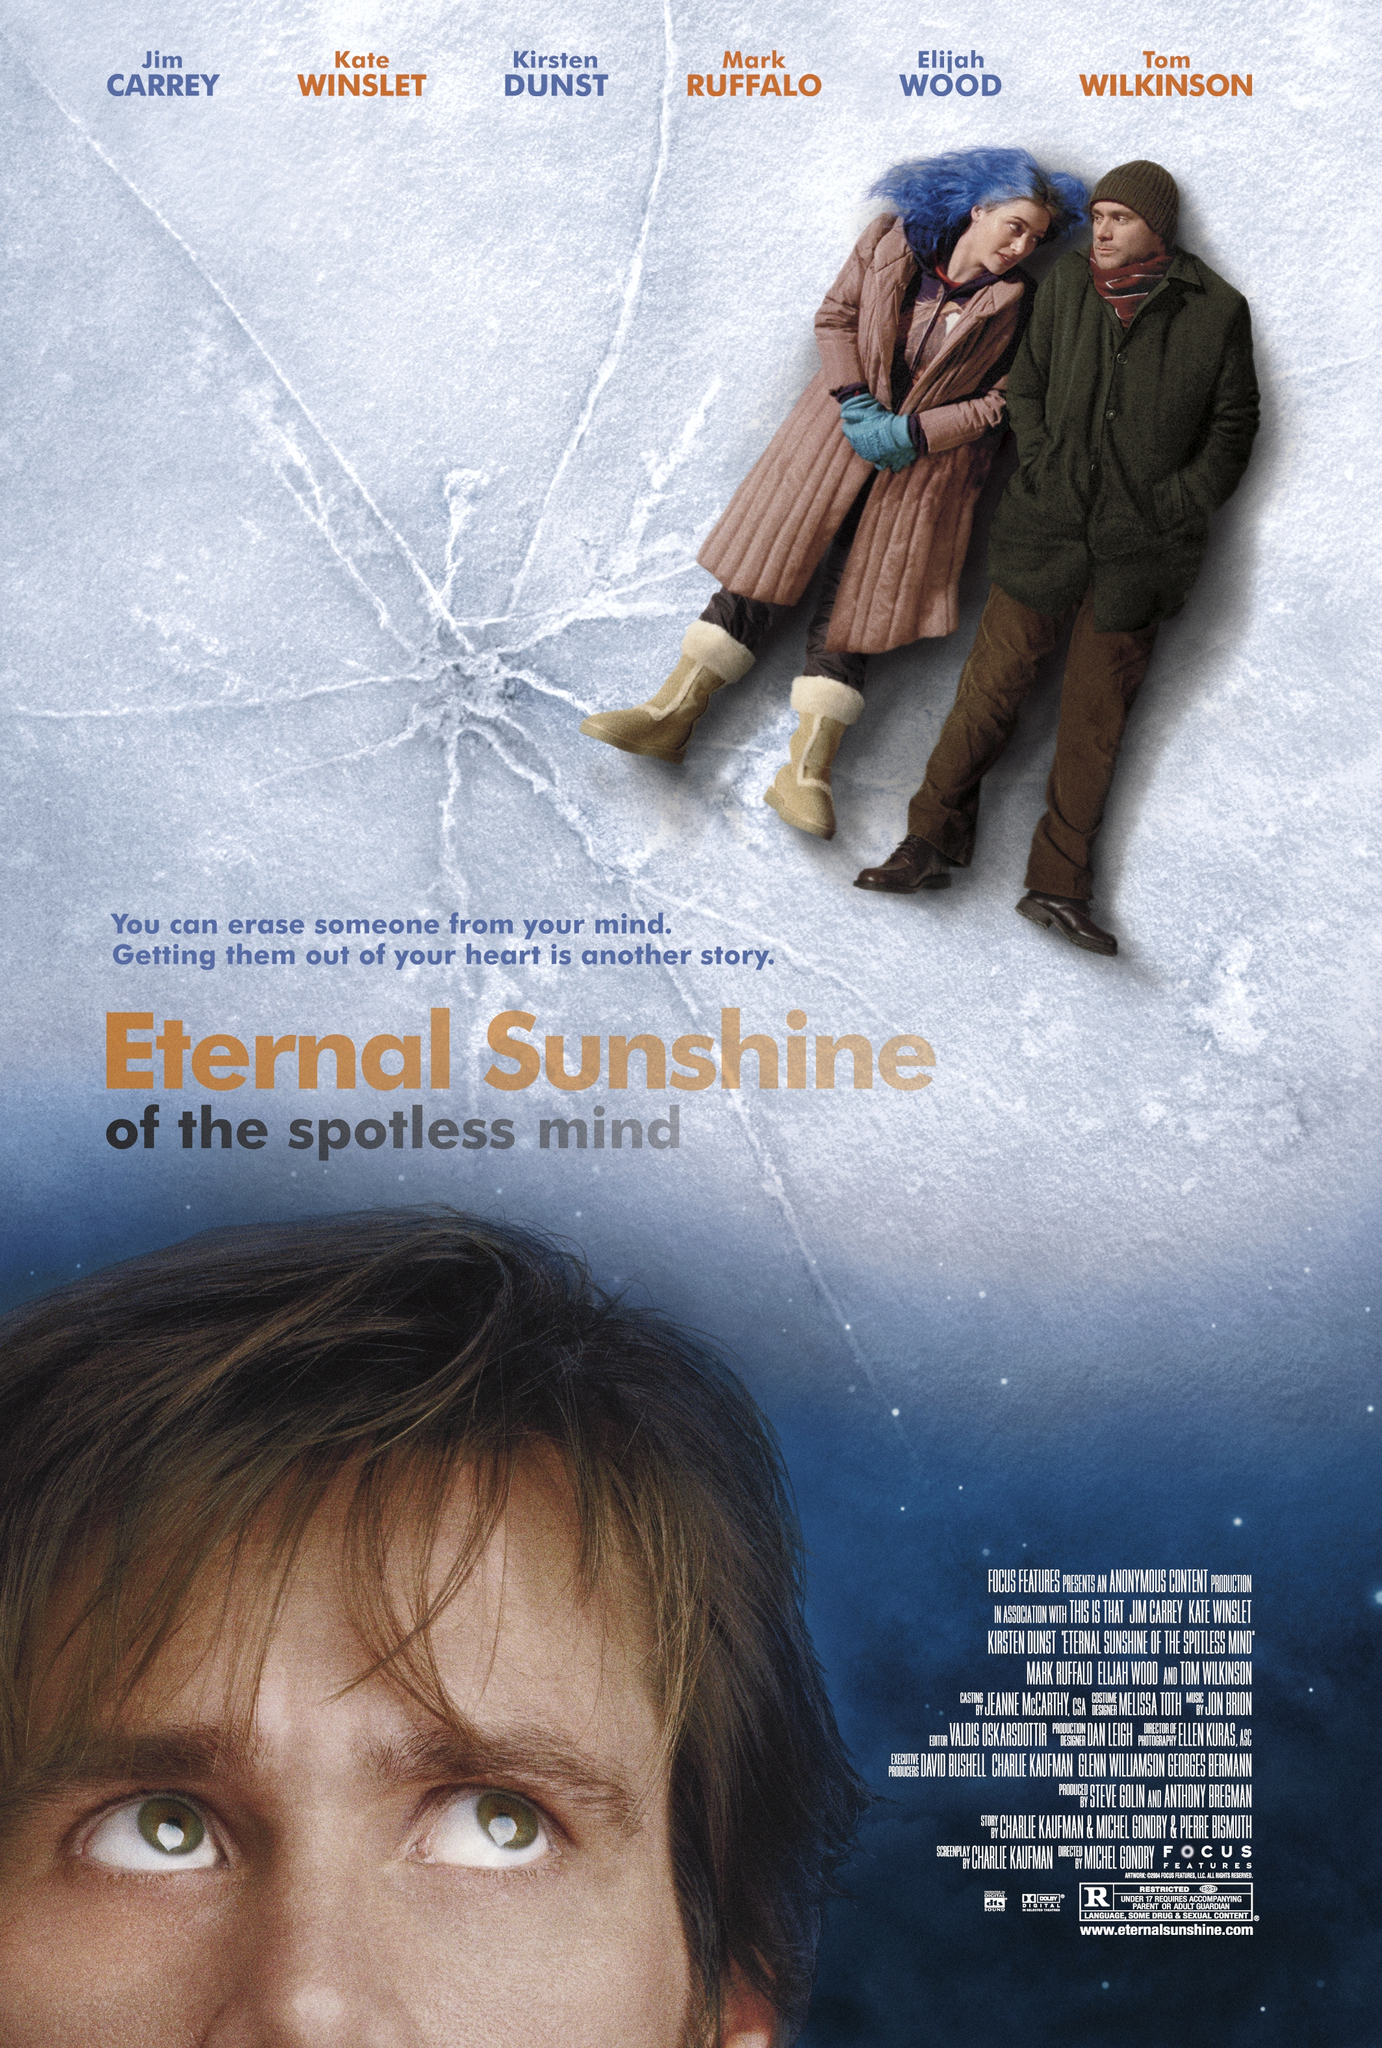 Eternal Sunshine of the Spotless Mind sci-fi movies